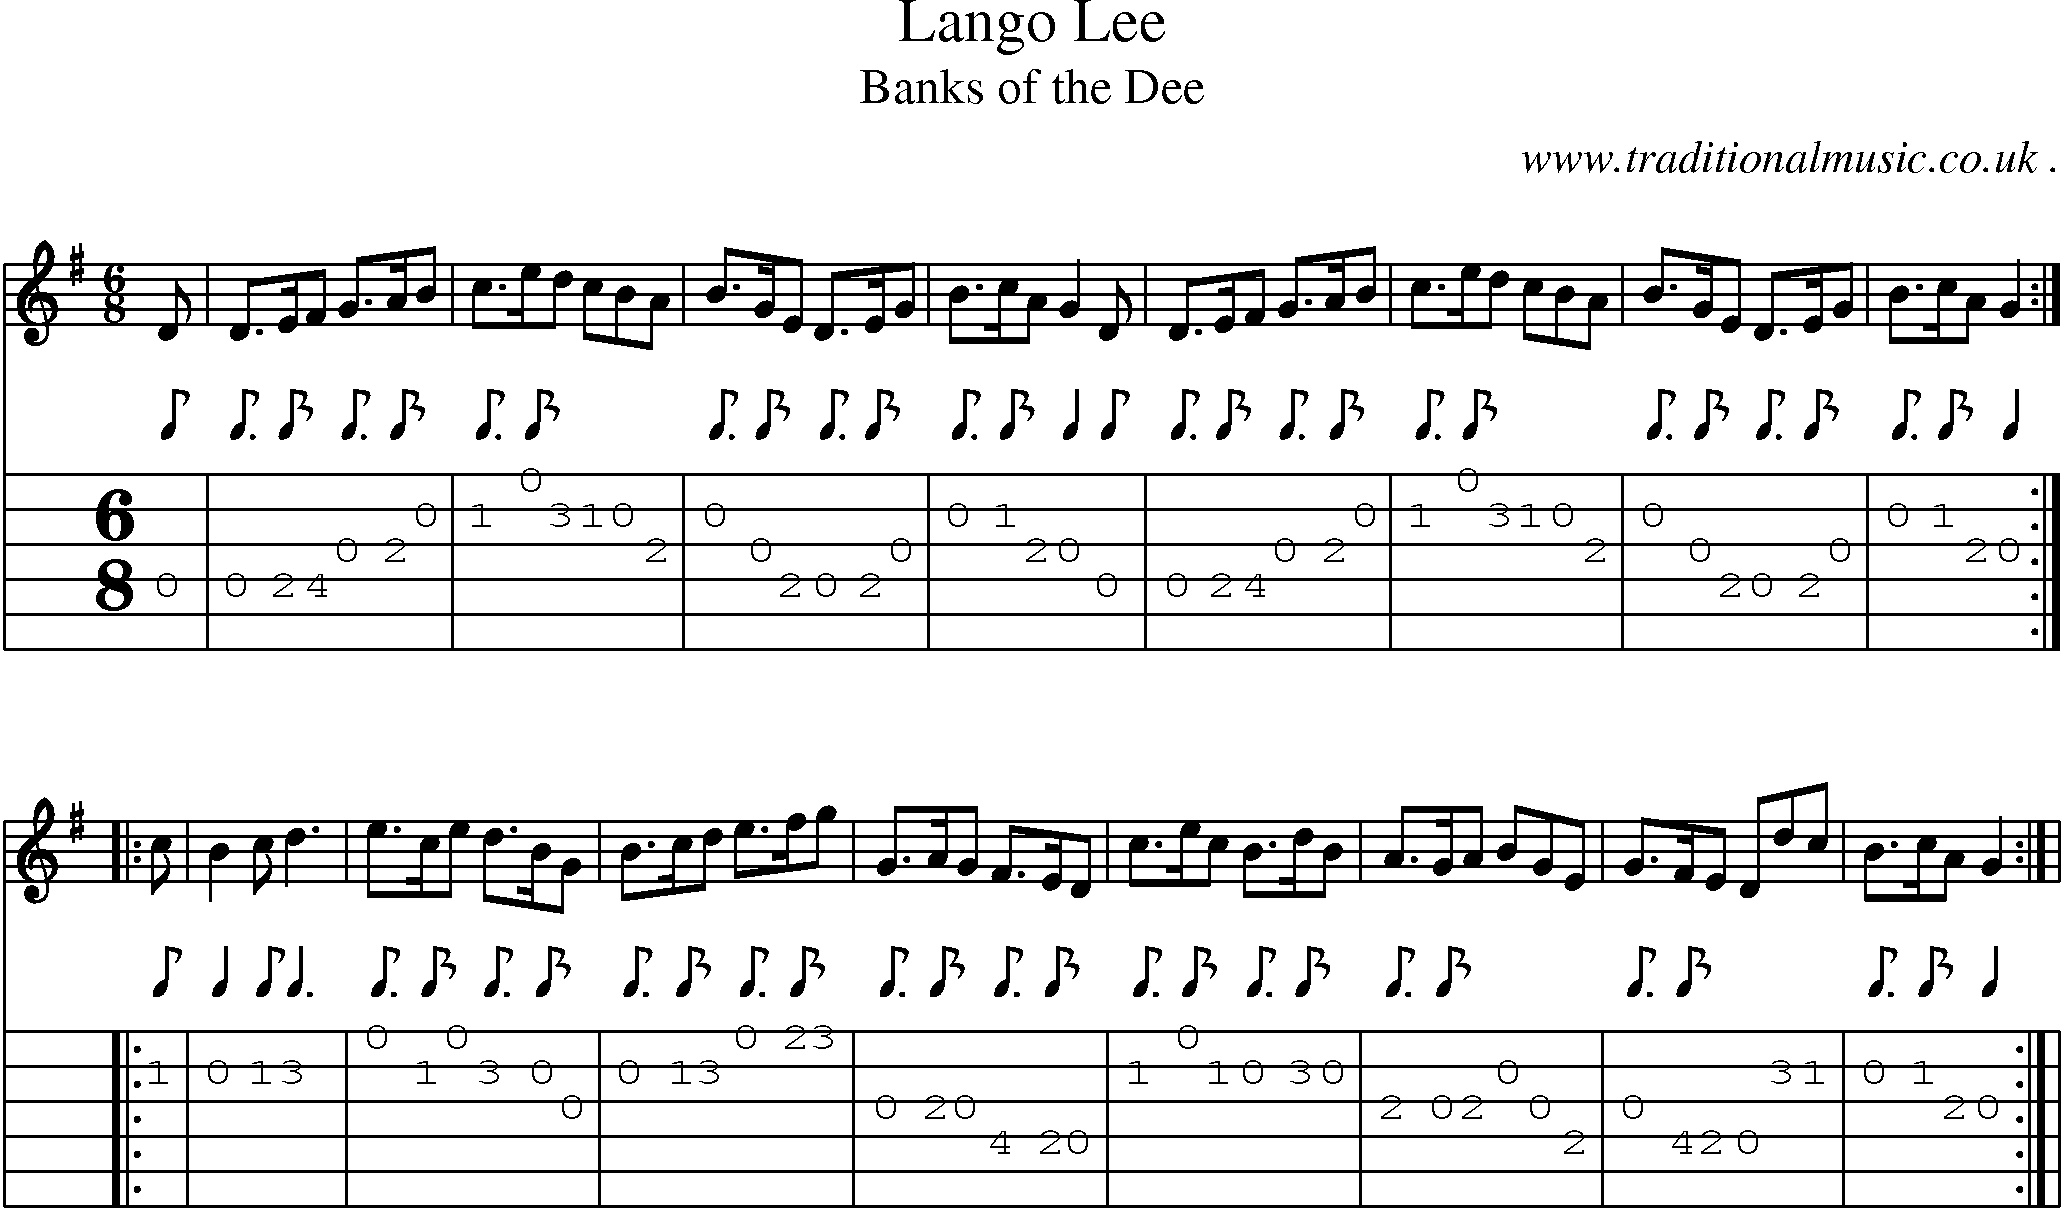 Sheet-Music and Guitar Tabs for Lango Lee